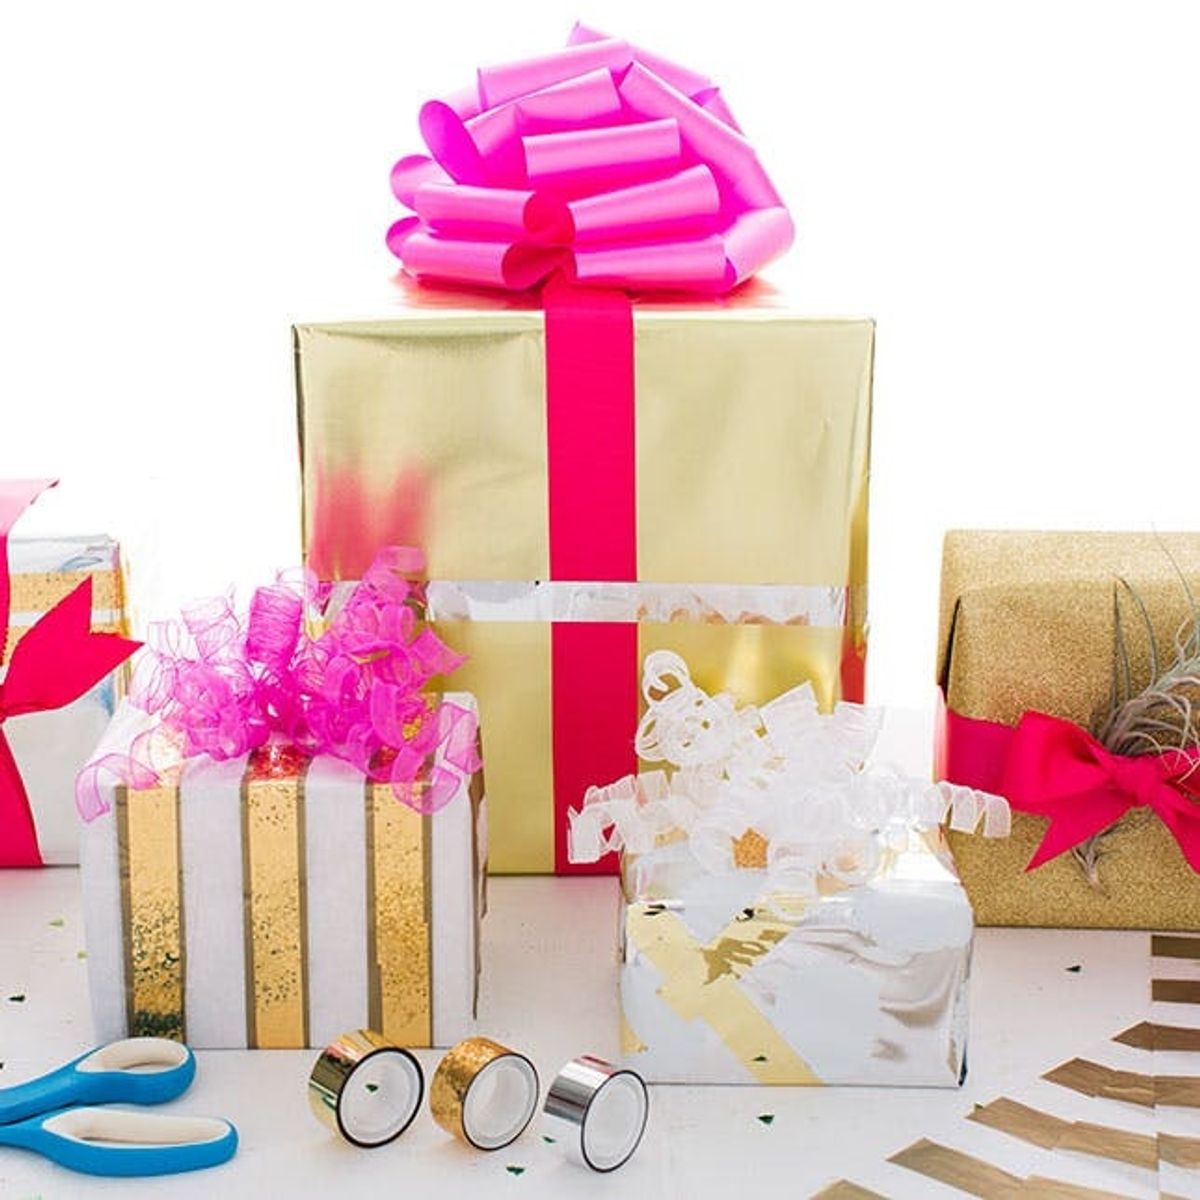 Bling Out Your Gifts With Metallic Wrapping Hacks